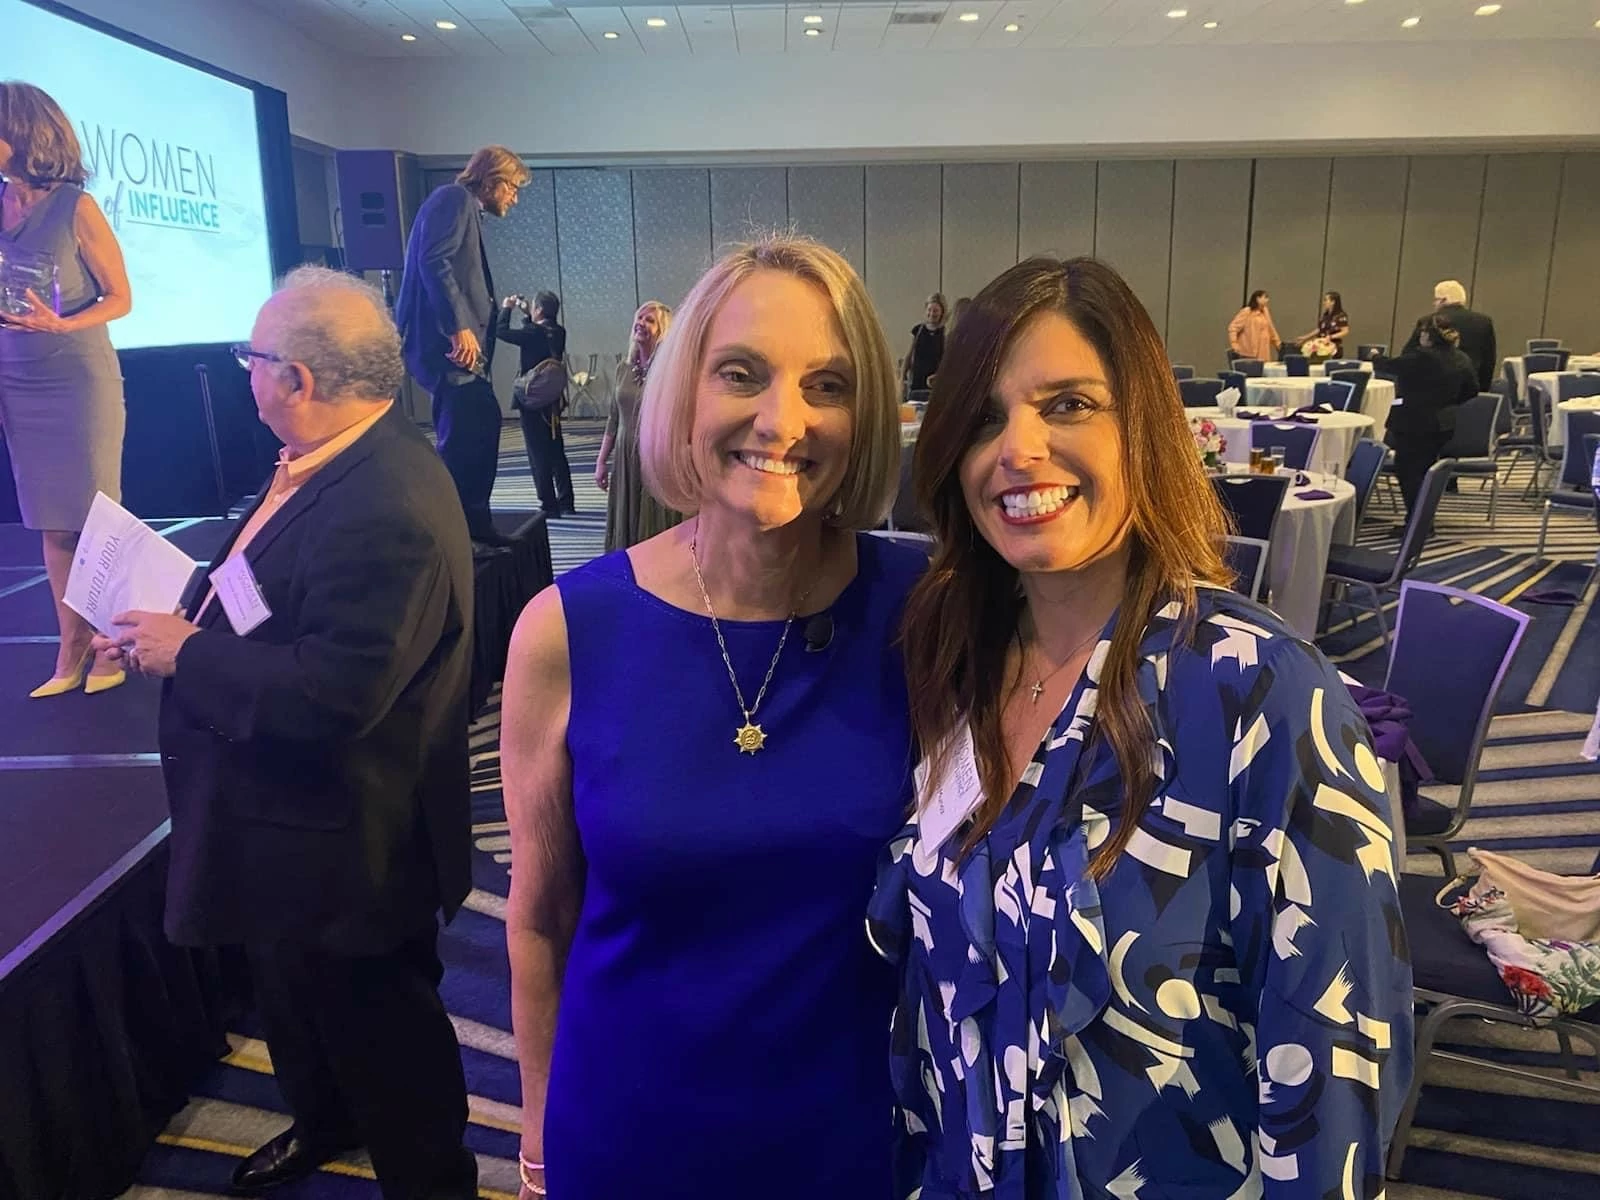 Such an honor to meet Annette Walker, President of City Of Hope Hospital, at the Women of Influence event hosted by the Greater Irvine Chamber.